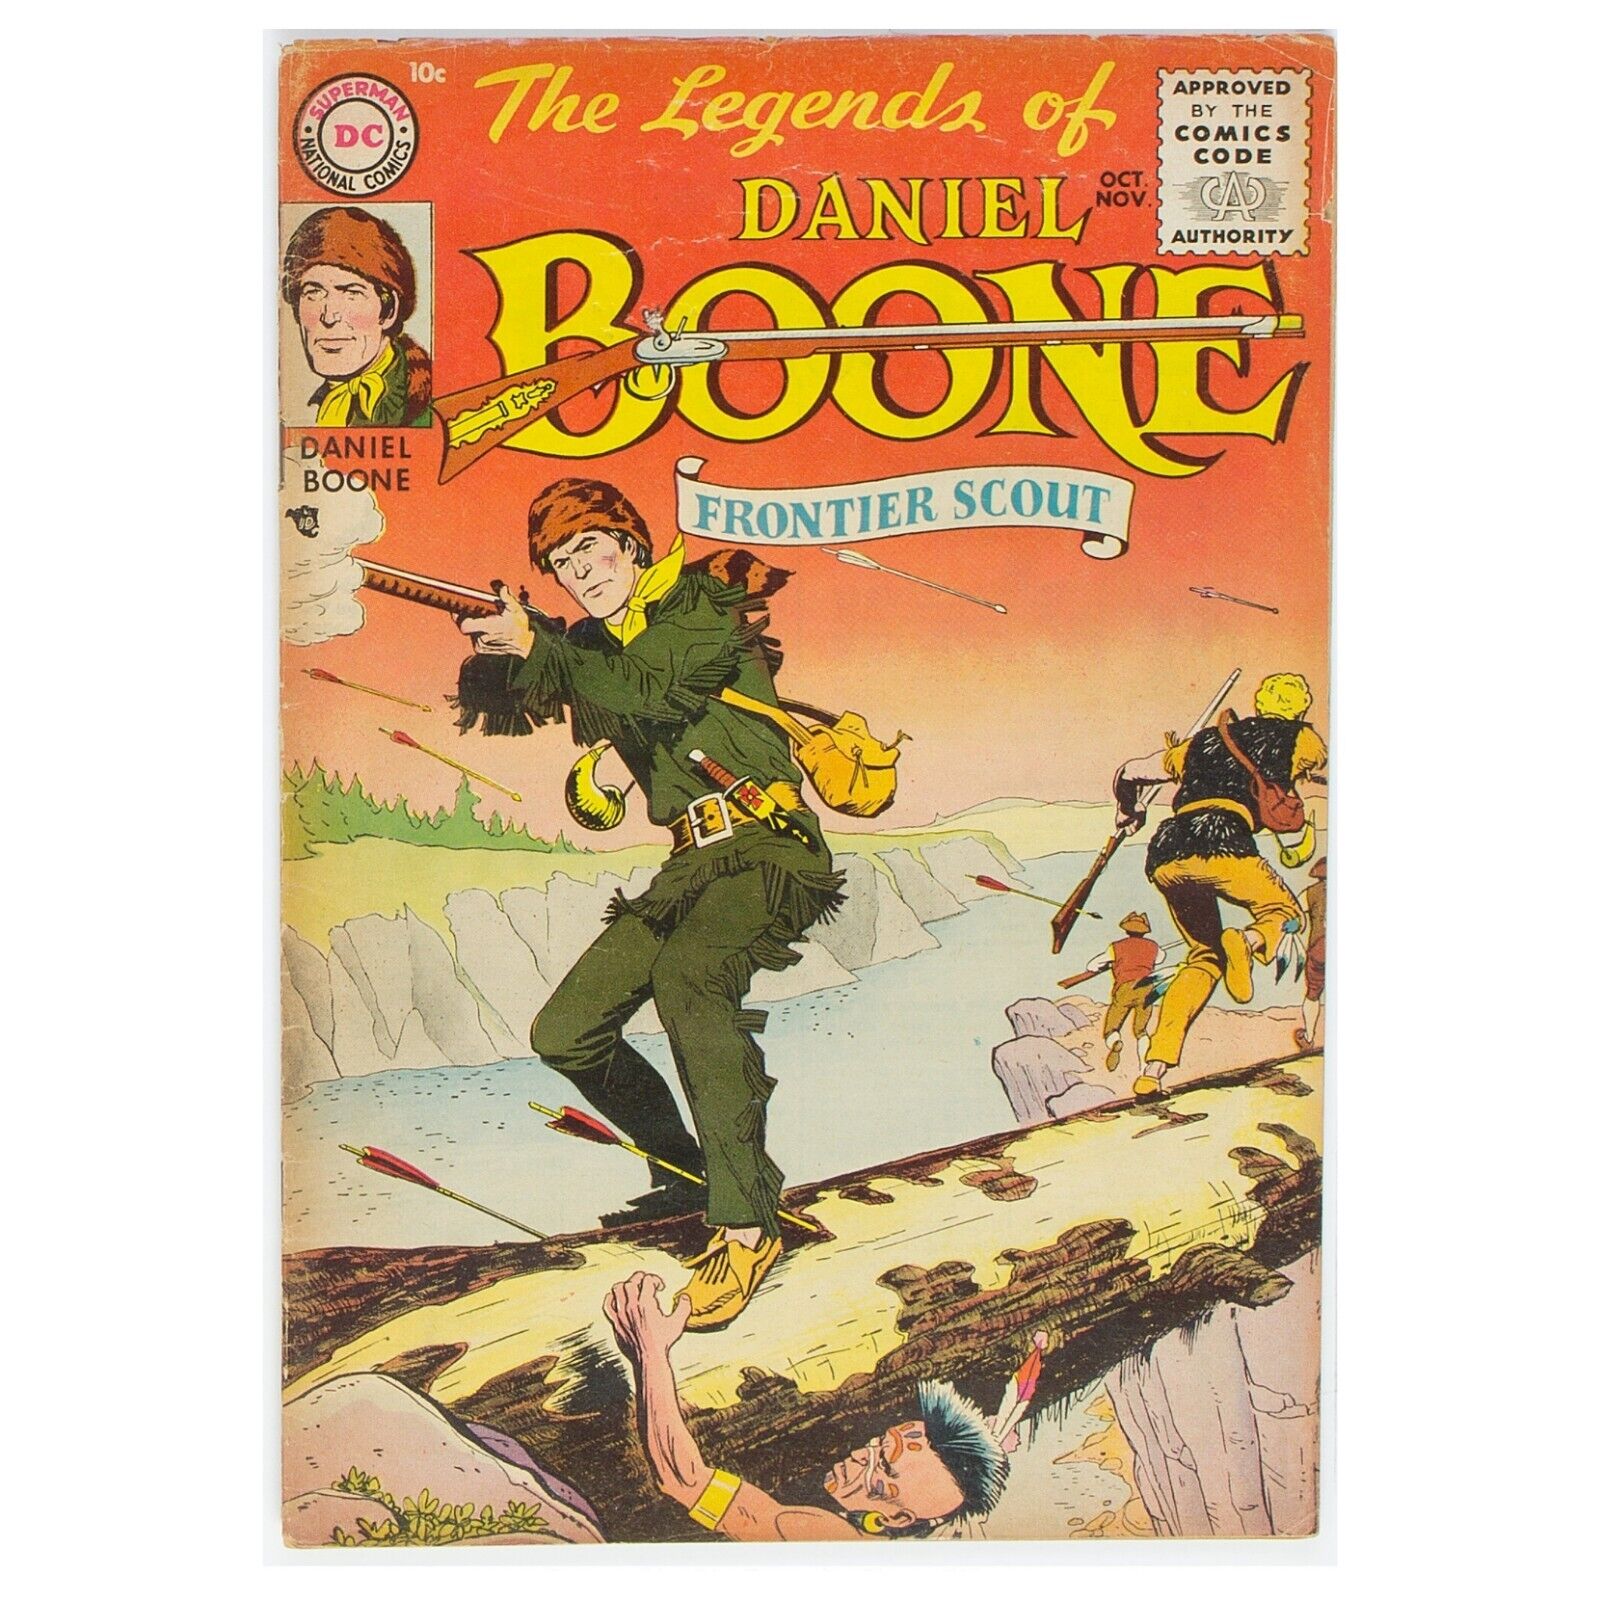 LEGENDS OF DANIEL BOONE #1 VG/FN (DC 1955) Scarce | Nick Cardy | Premiere Issue